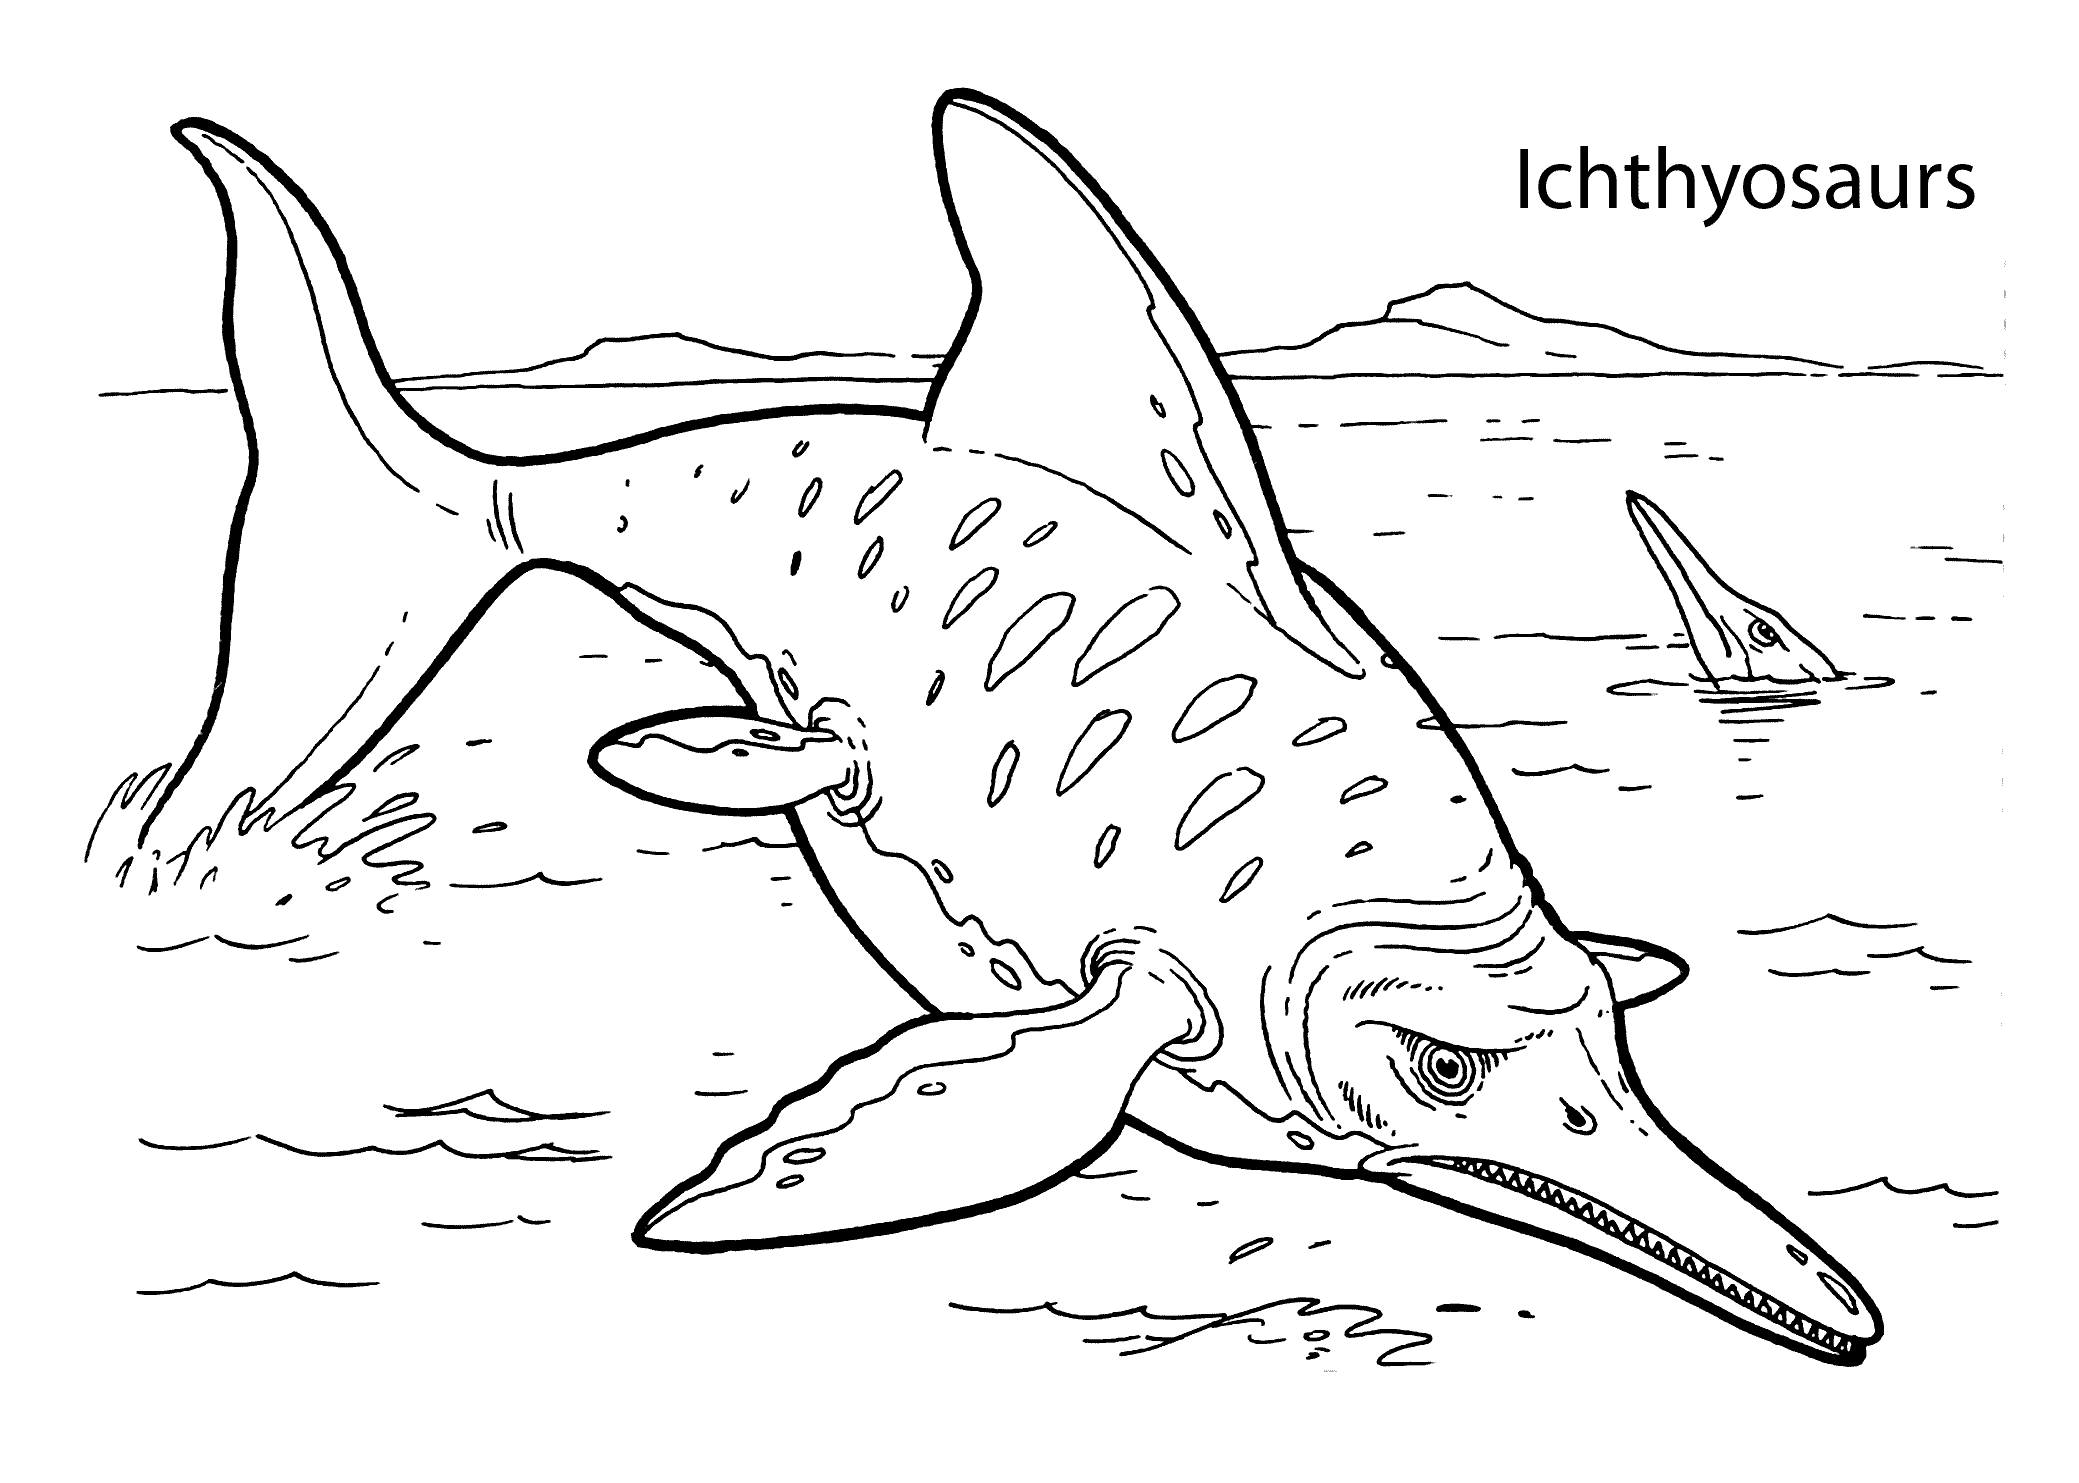 Ichthyosaurs dinosaur coloring pages for kids, printable free